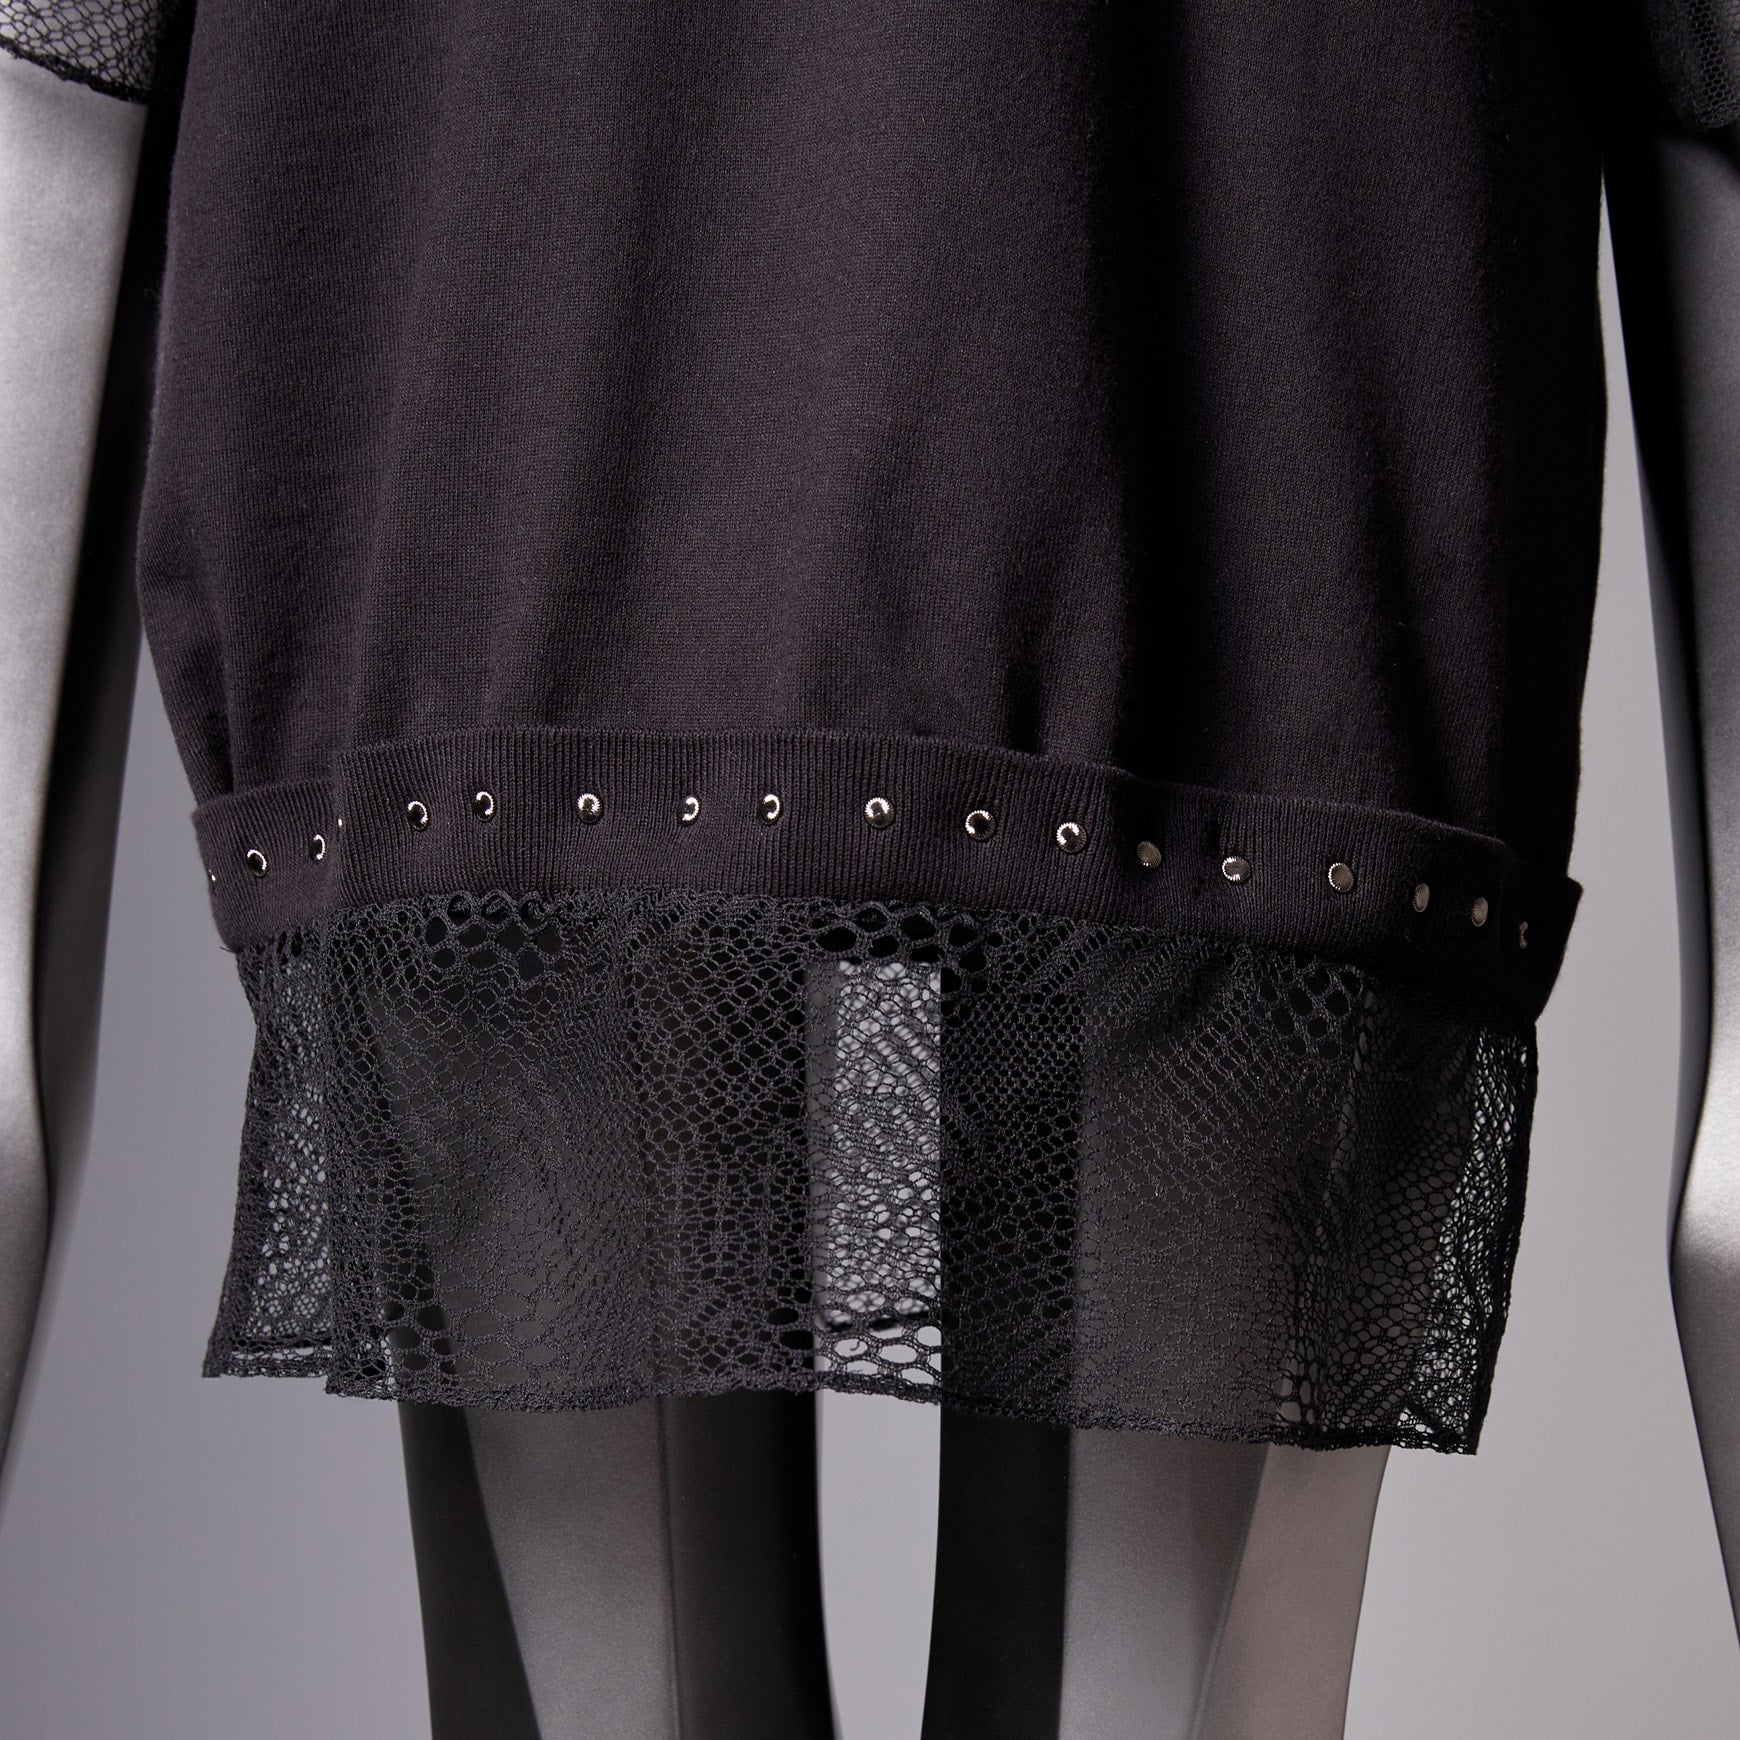 TYPE-1 Knit French Lace Waist Part (Black Cells)